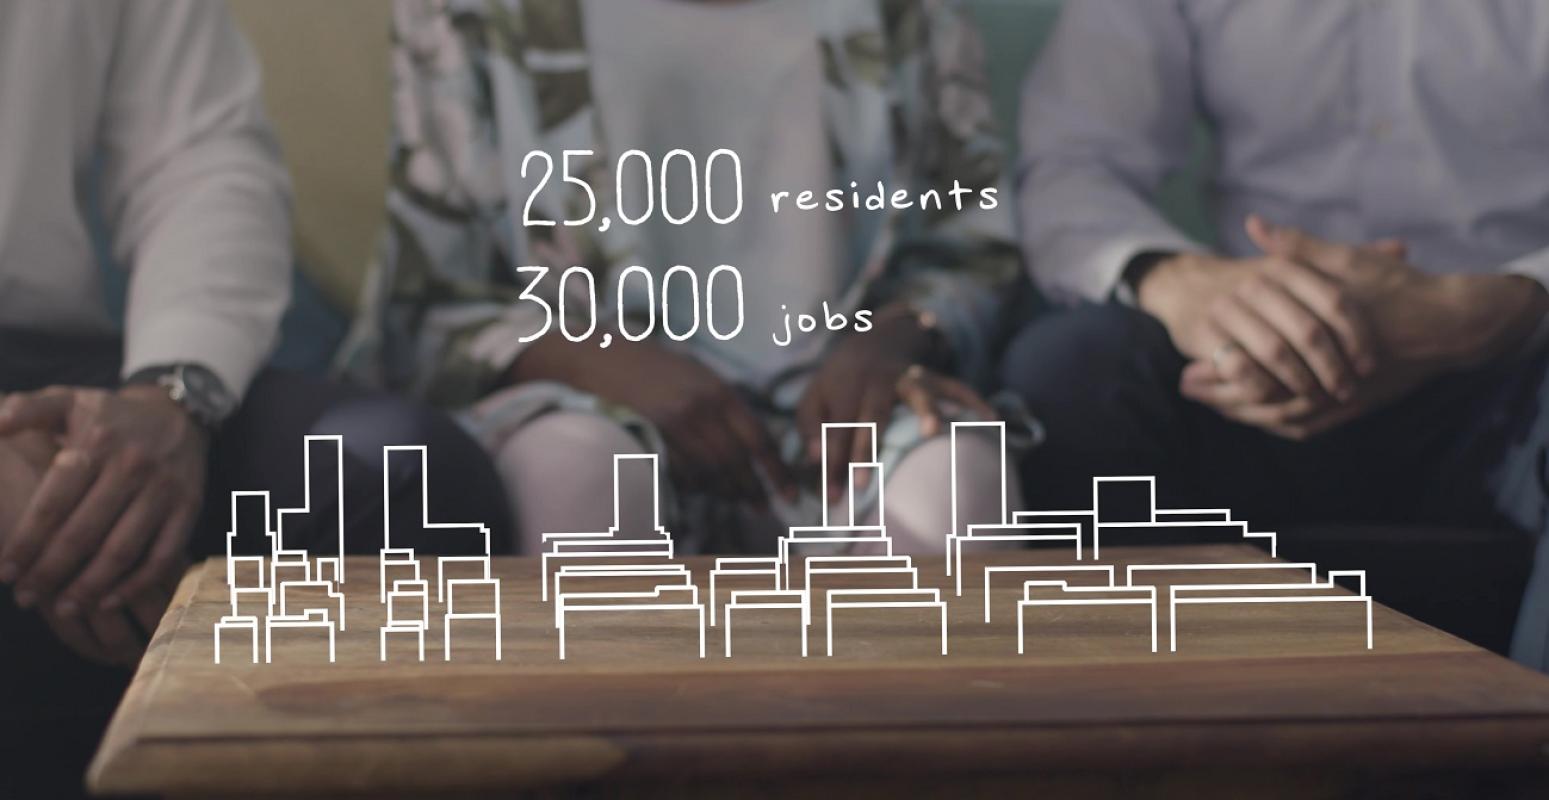 Image with text and graphics on it indicating the future Port Lands will have 25,000 residents and 30,000 jobs